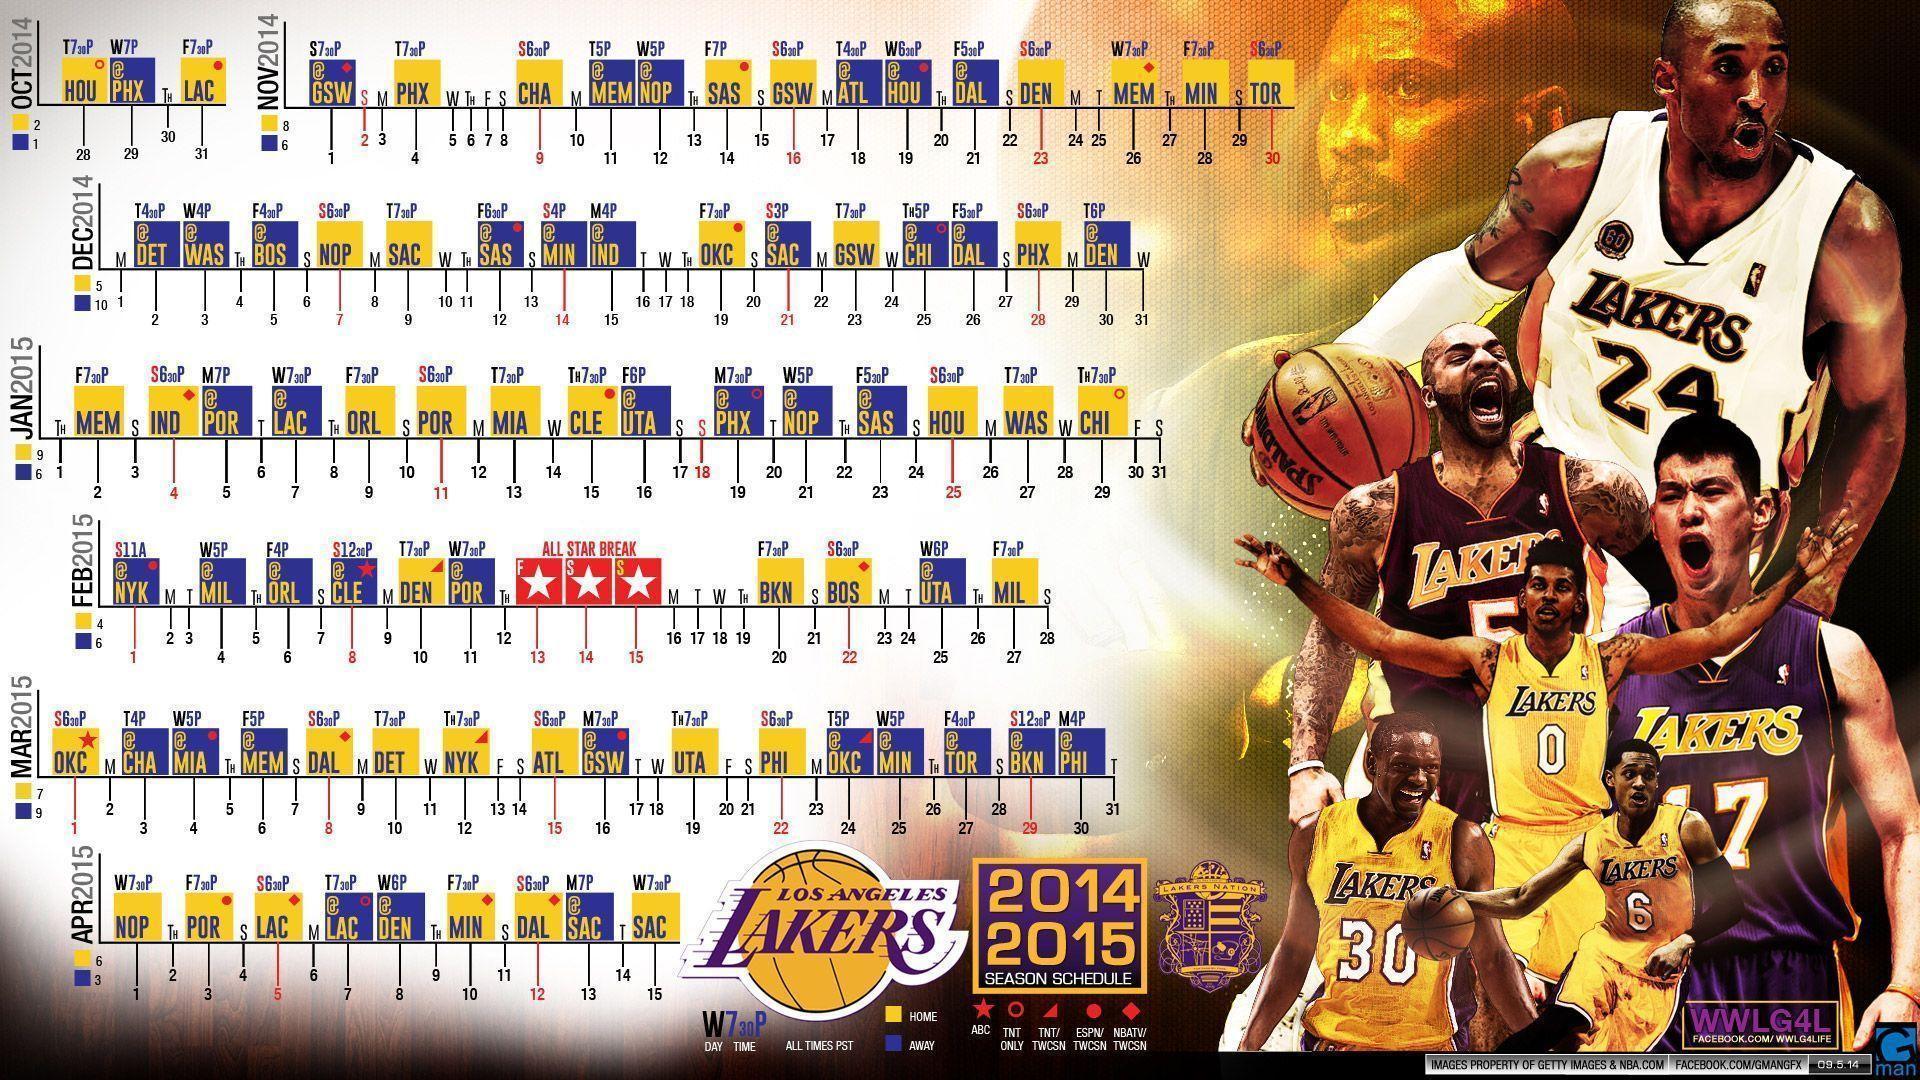 Came Across A Schedule Wallpaper For The 2014 2015 Season, Hope